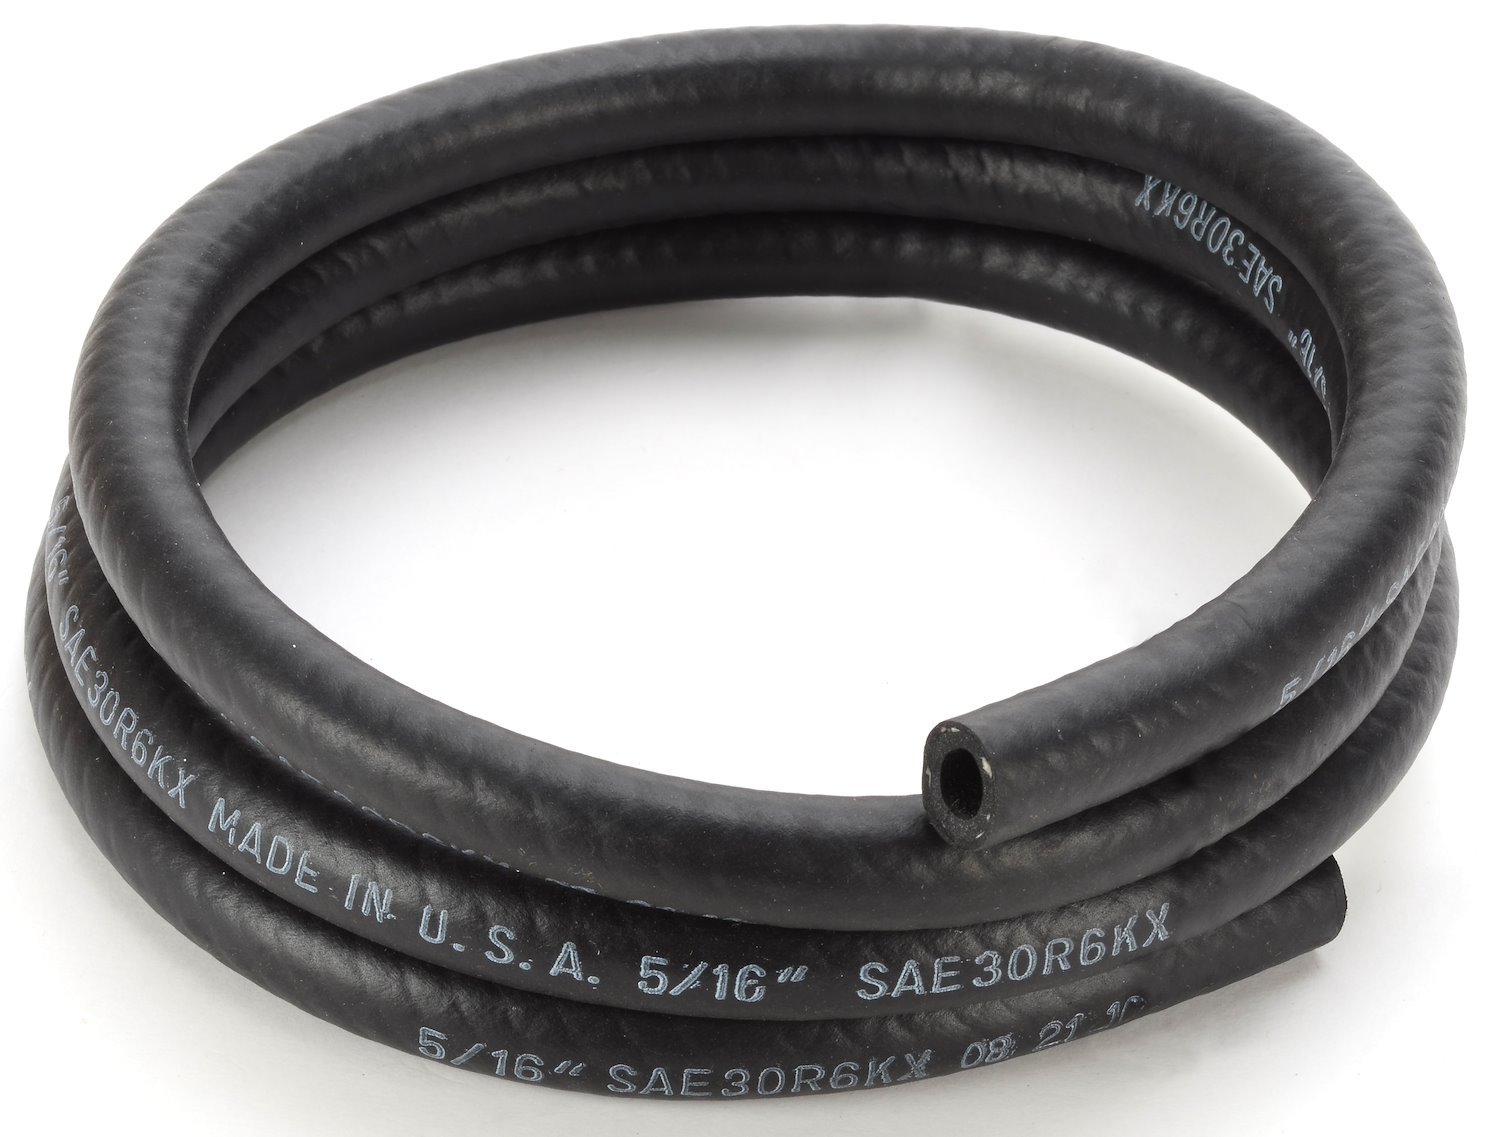 FUEL LINE HOSE 5/16" ID 5 FEET LONG BLACK RUBBER HOSE MADE IN THE USA